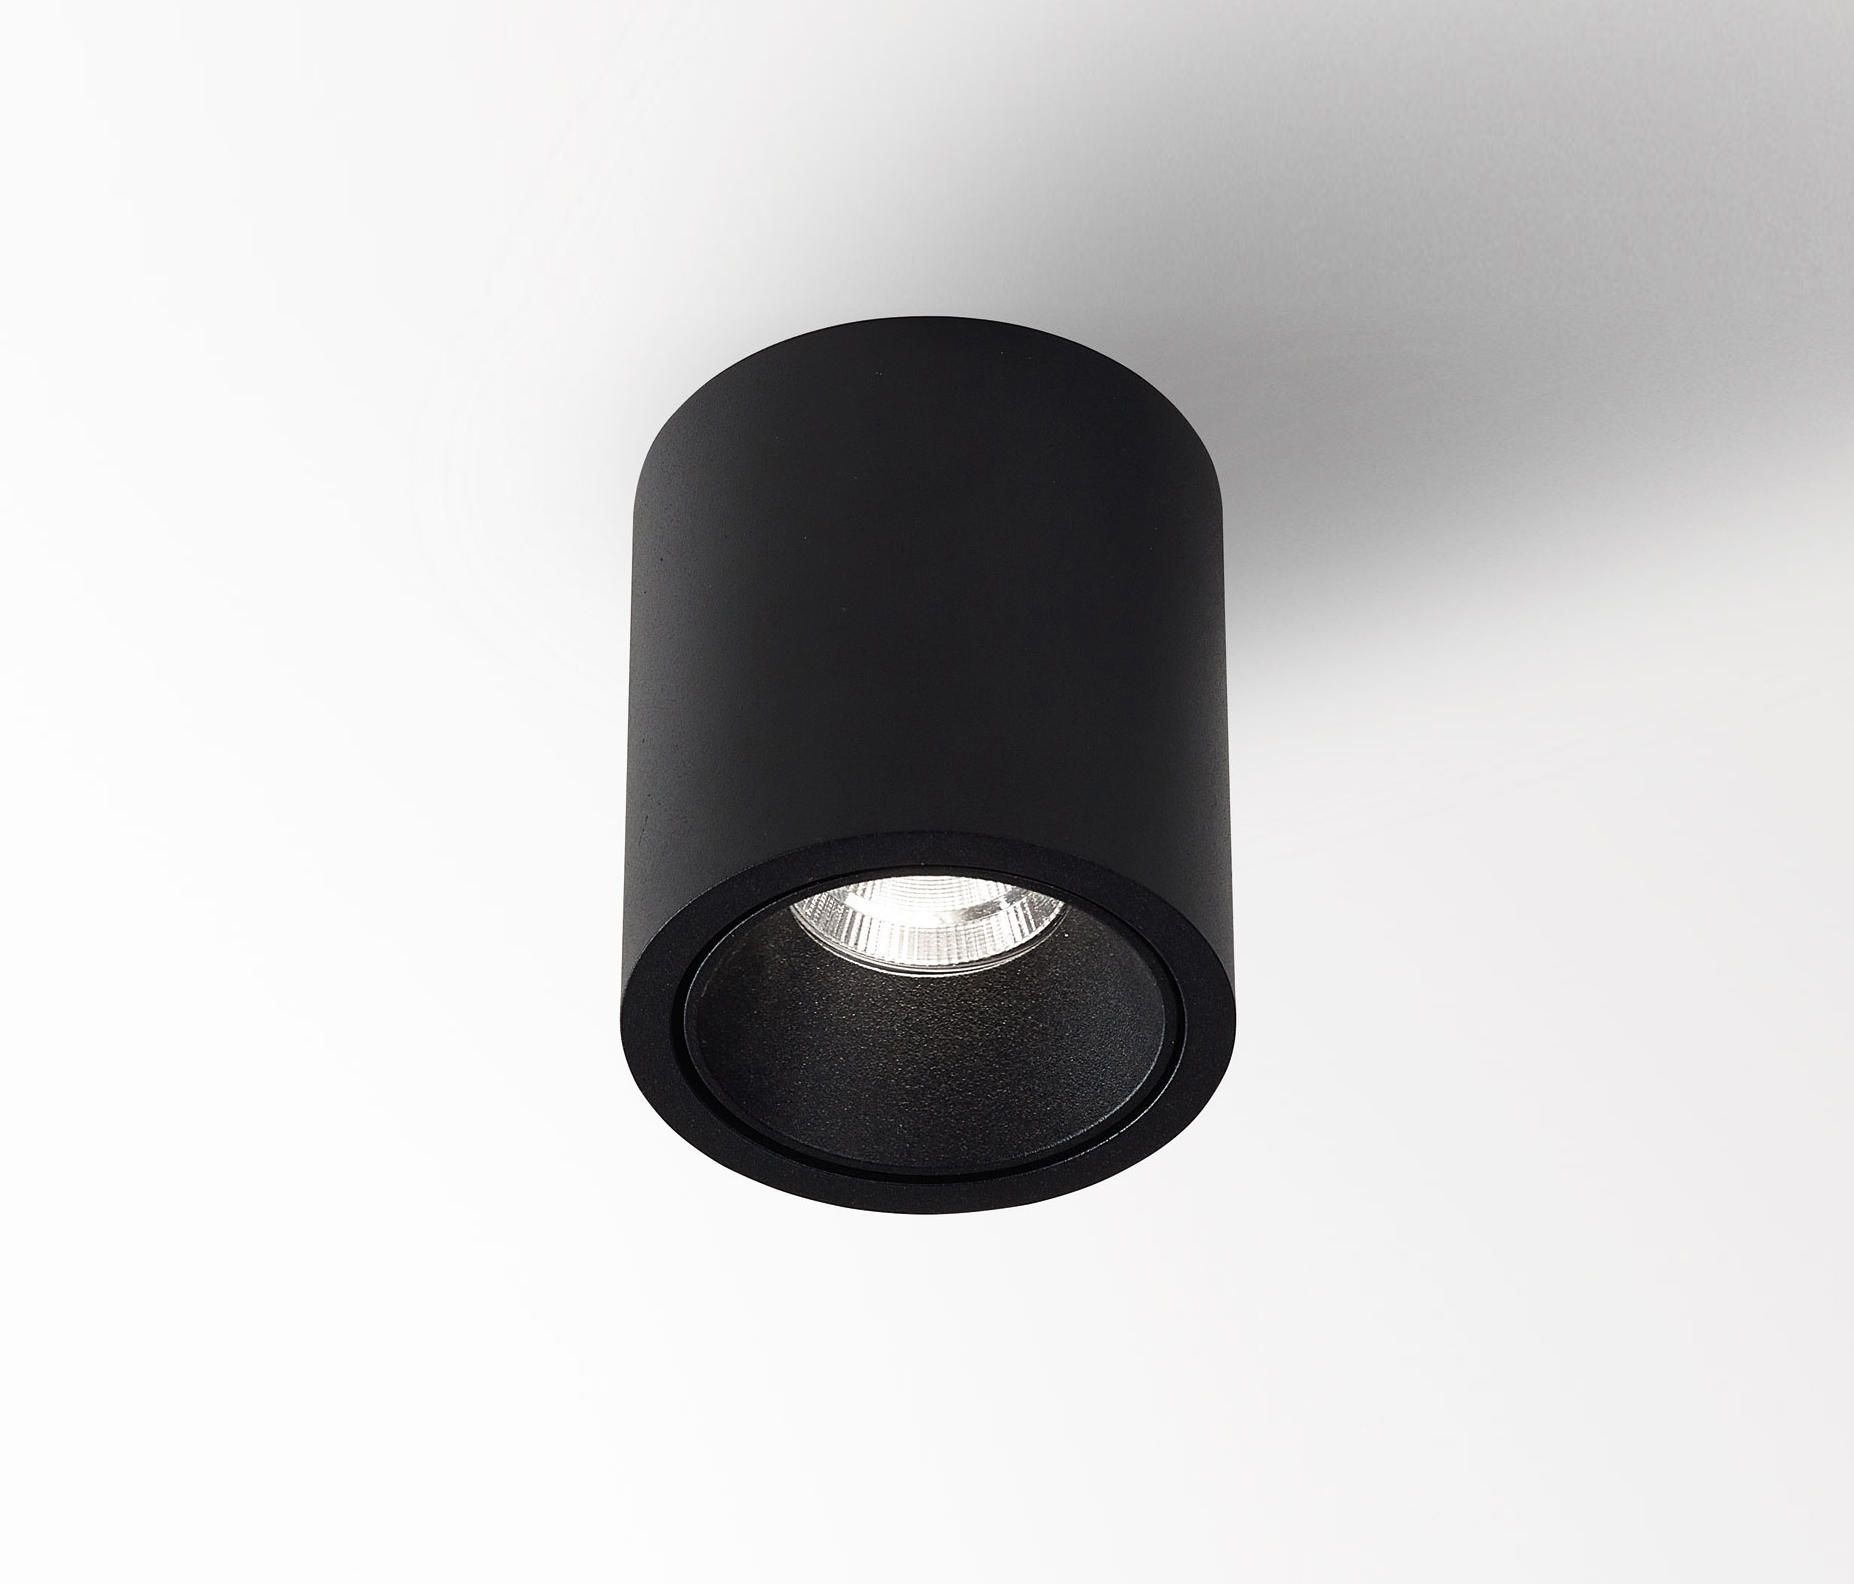 BOXY R 92733 - Ceiling lights from Delta Light | Architonic